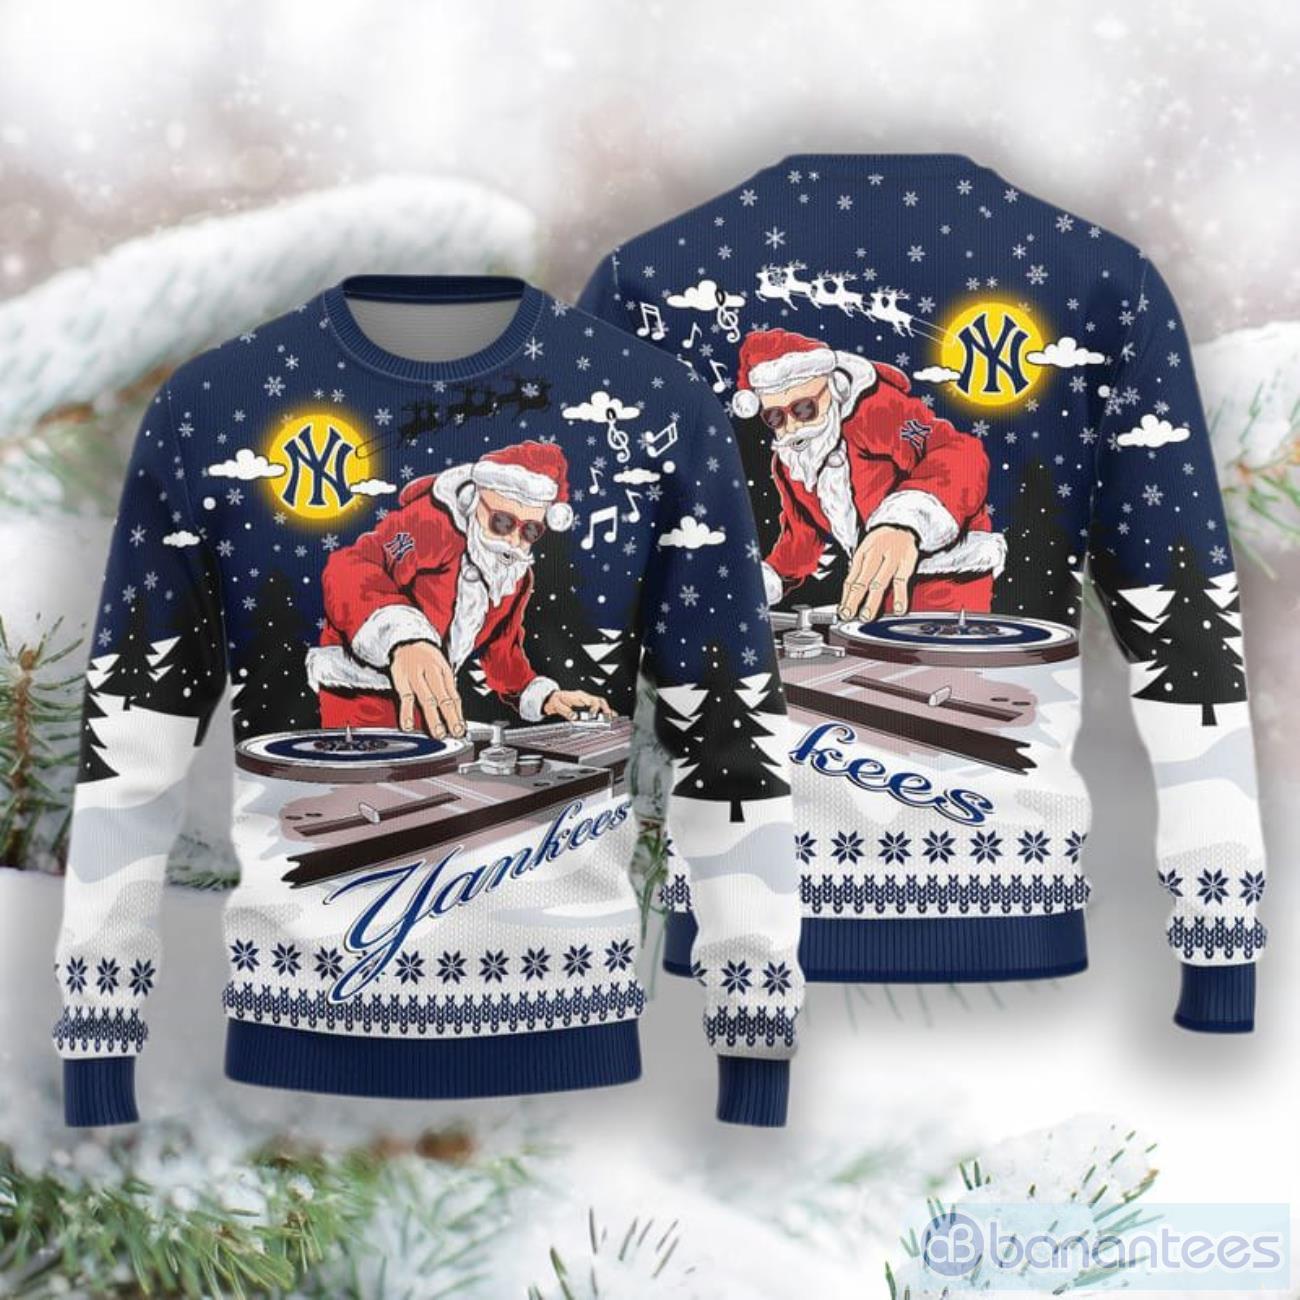 Christmas New York Yankees Curved Stripes Knitted Sweater For Fans -  Banantees